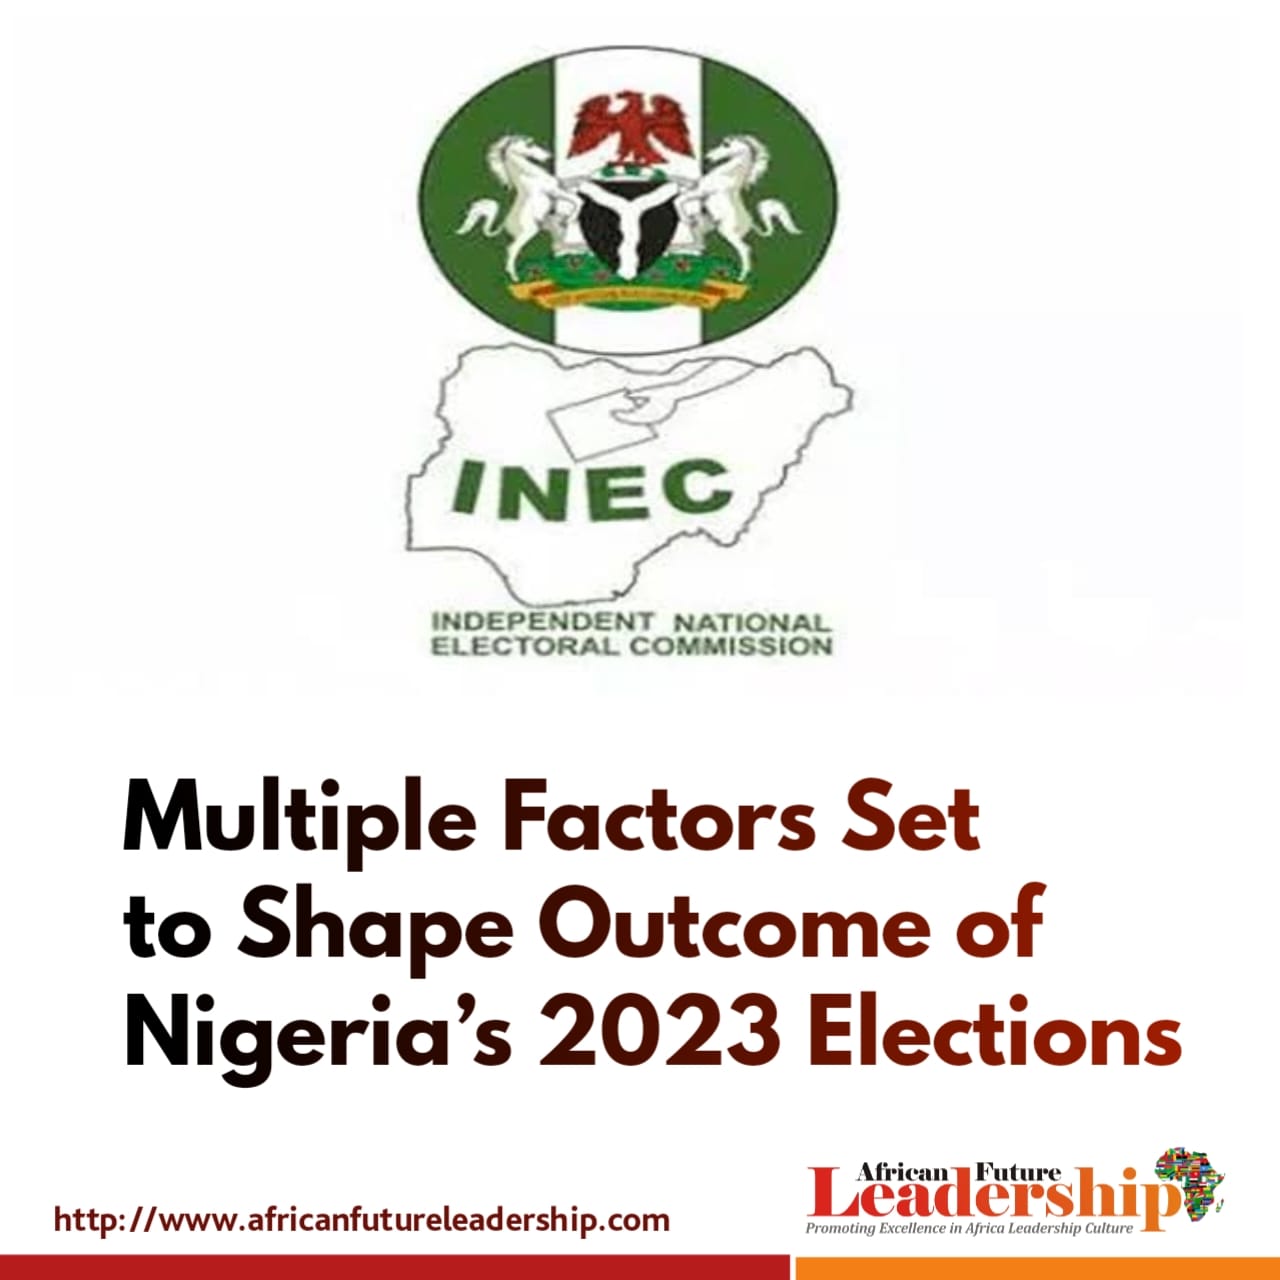 Multiple Factors Set to Shape Outcome of Nigeria’s 2023 Elections